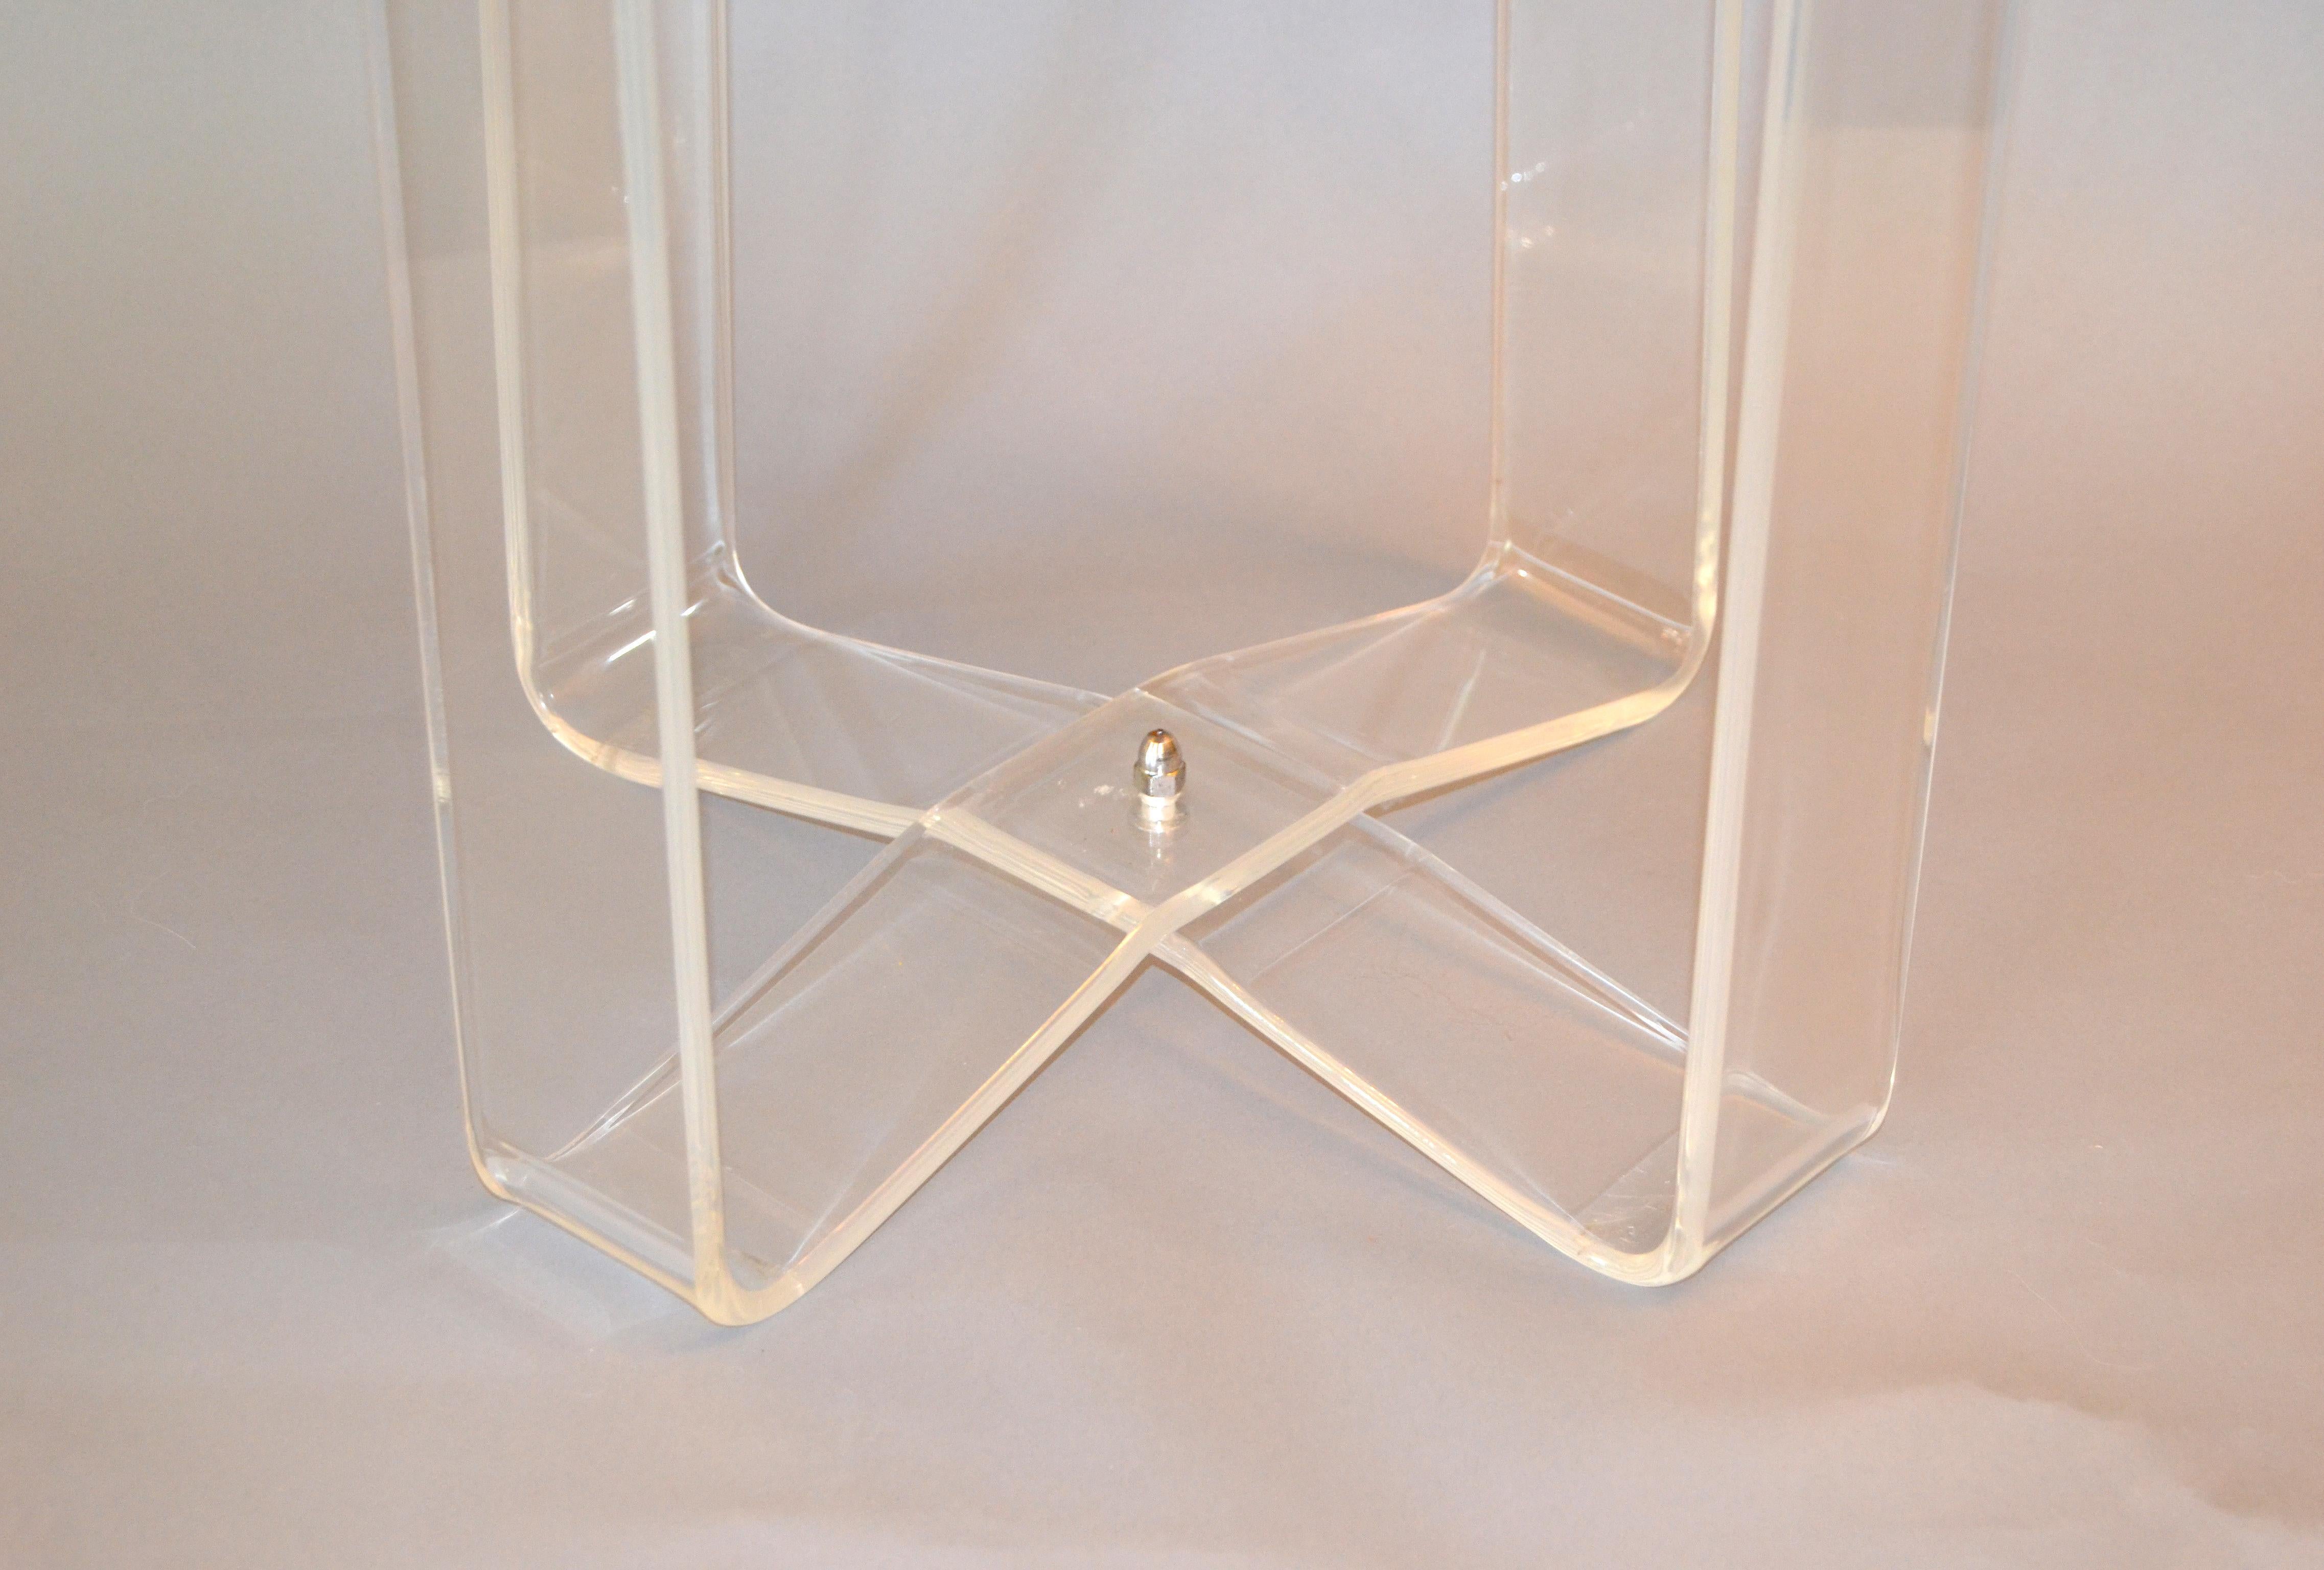 Hollywood Regency Round Lucite Stool Crissed-Cross Legs and Fabric Seat 3